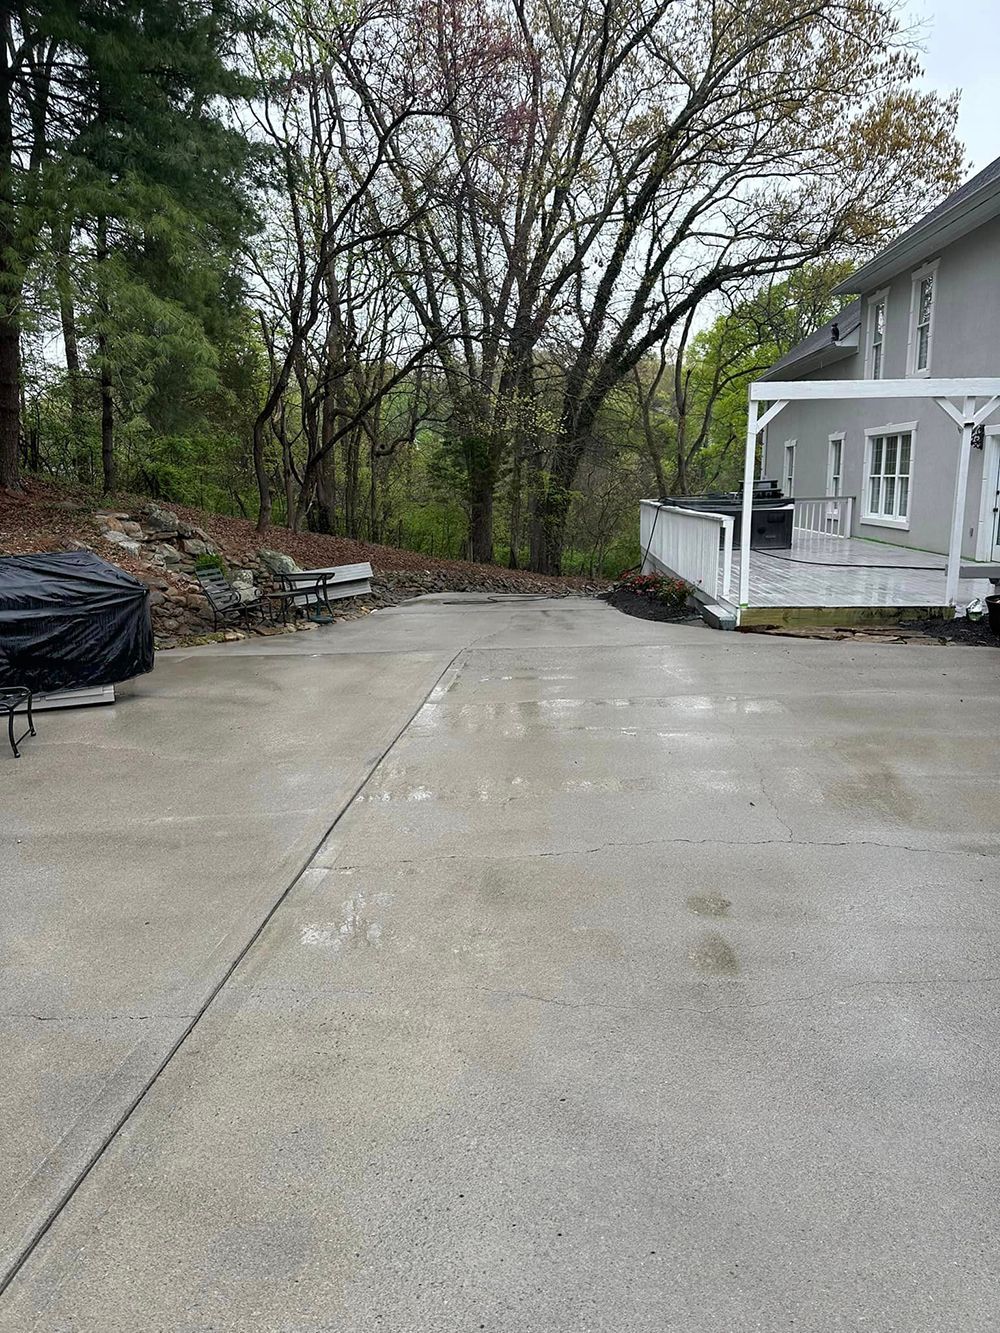 A concrete driveway leading to a house with trees in the background